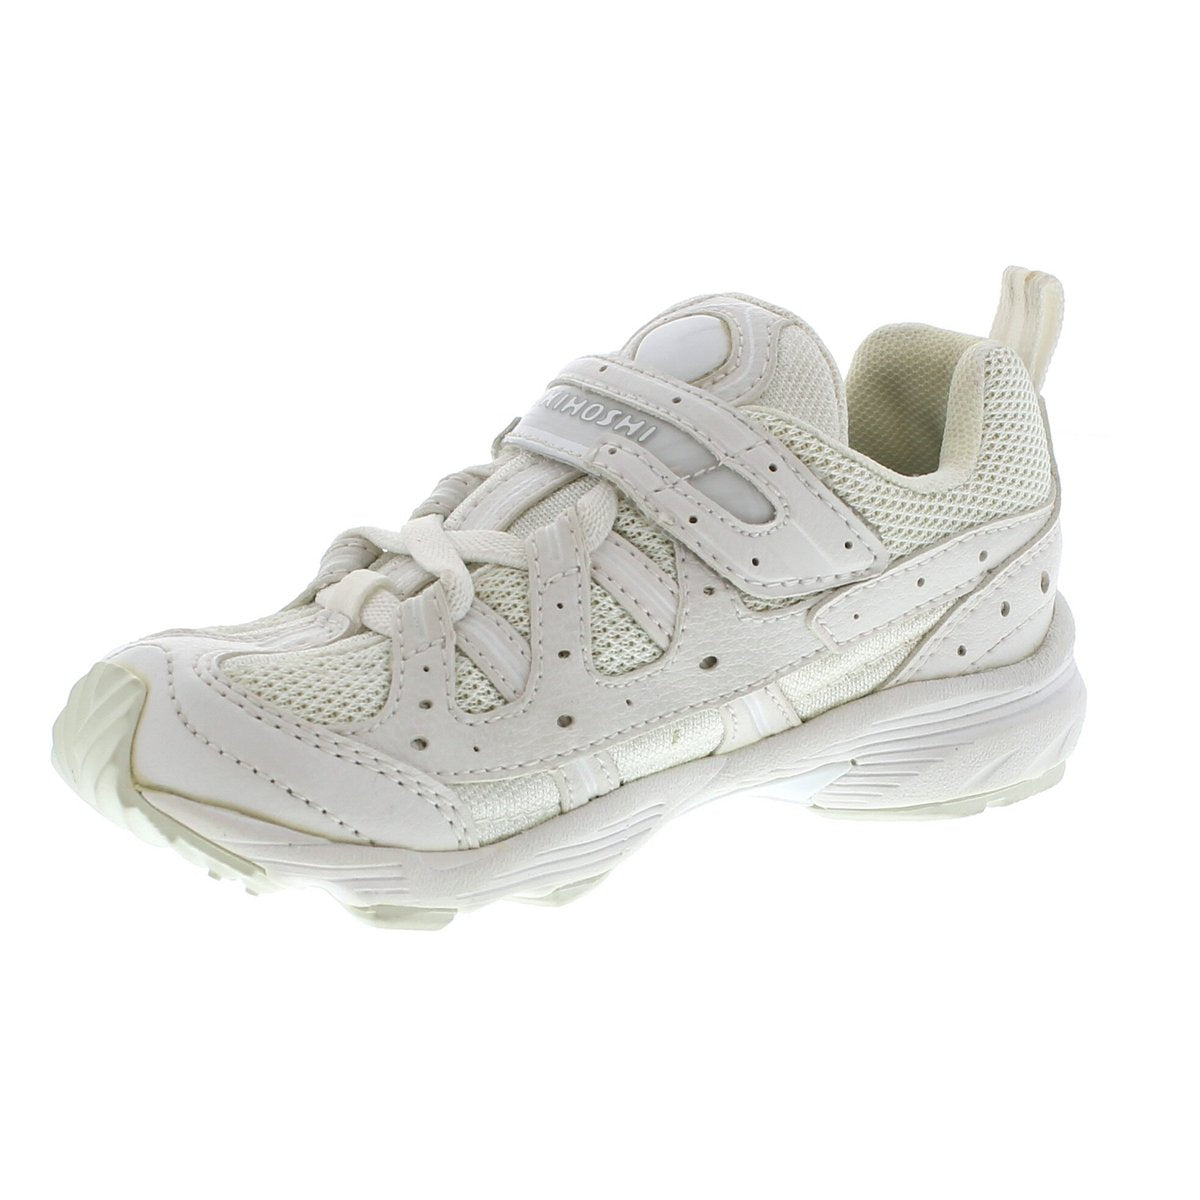 Childrens Tsukihoshi Speed Sneaker in White/White from the front view